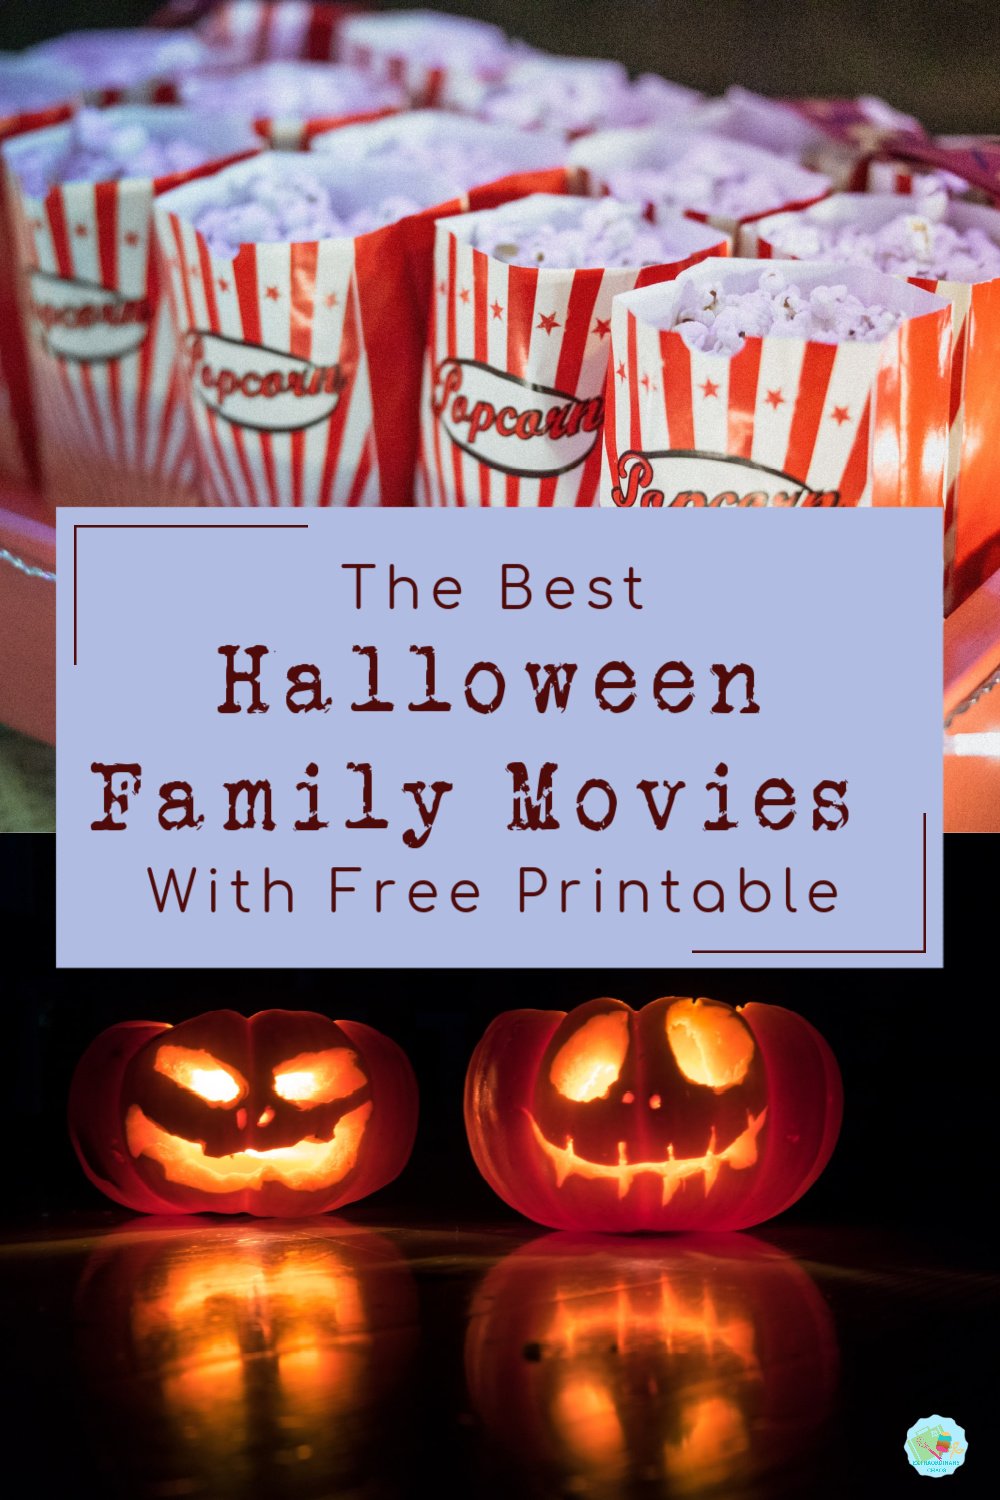 The best Halloween Movies for families with Free Printable to download and keep